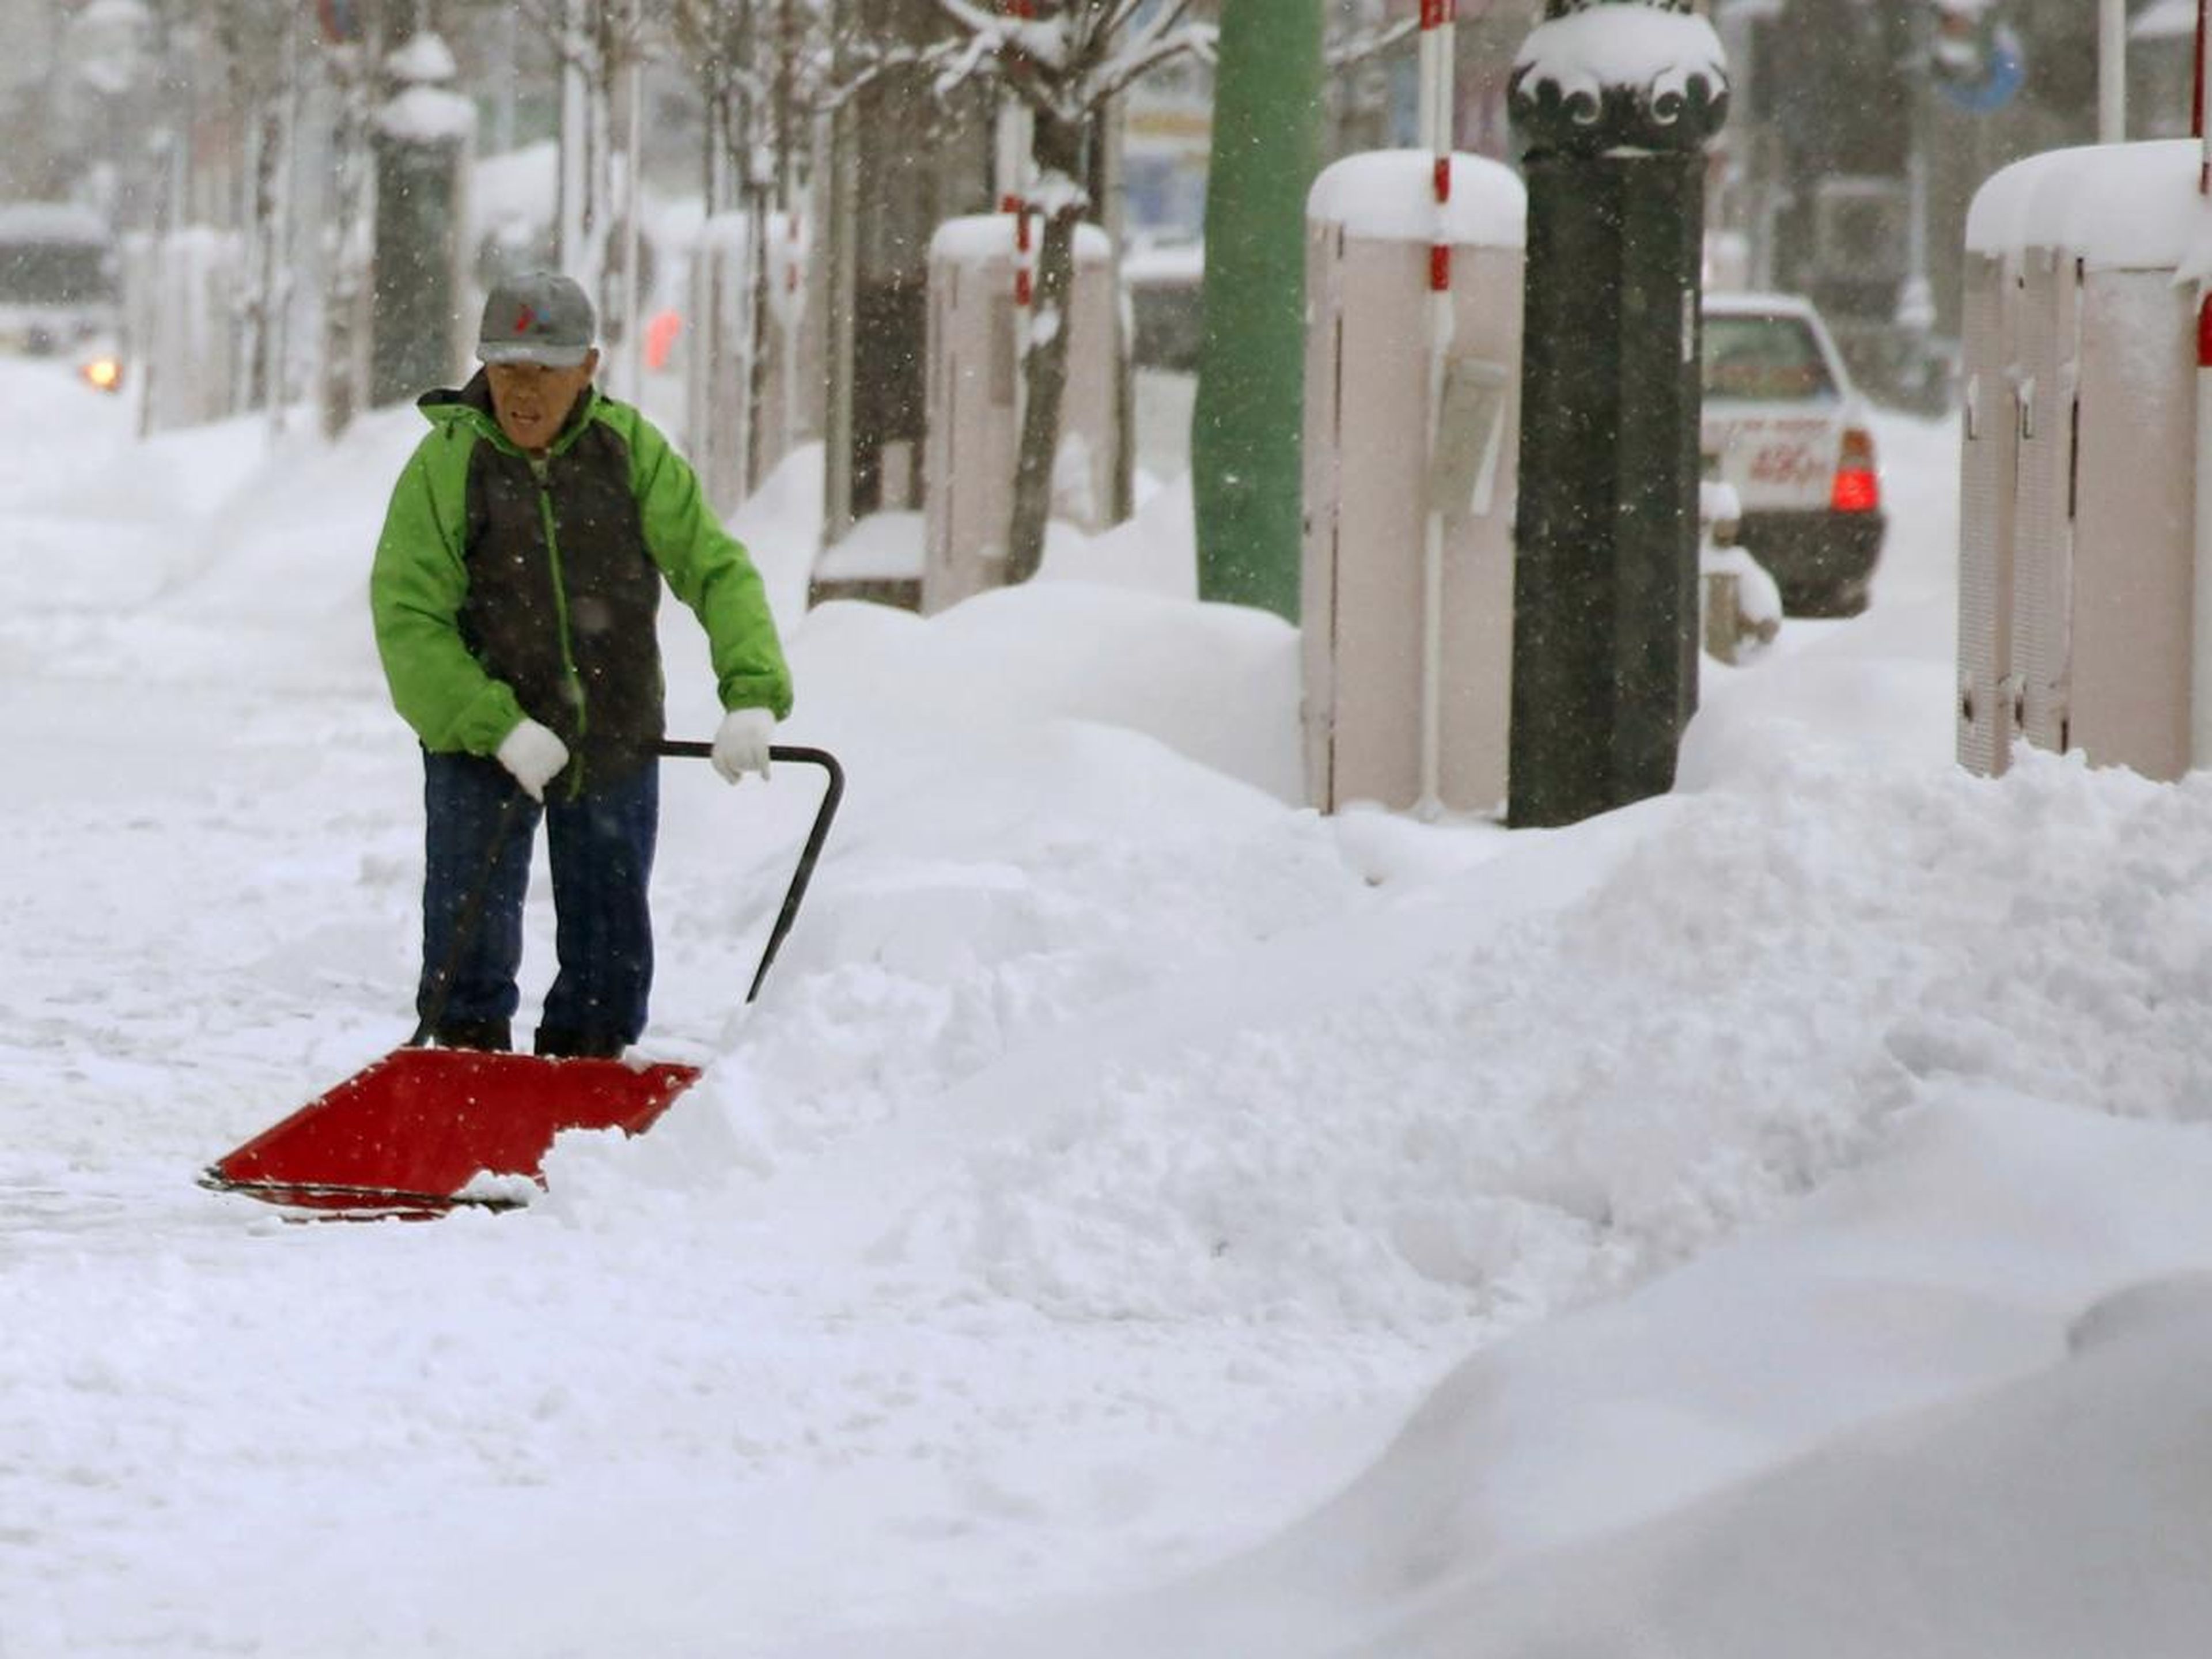 On more local roads and city streets, residents can either shovel and plow themselves or find a contractor to do the job for them.